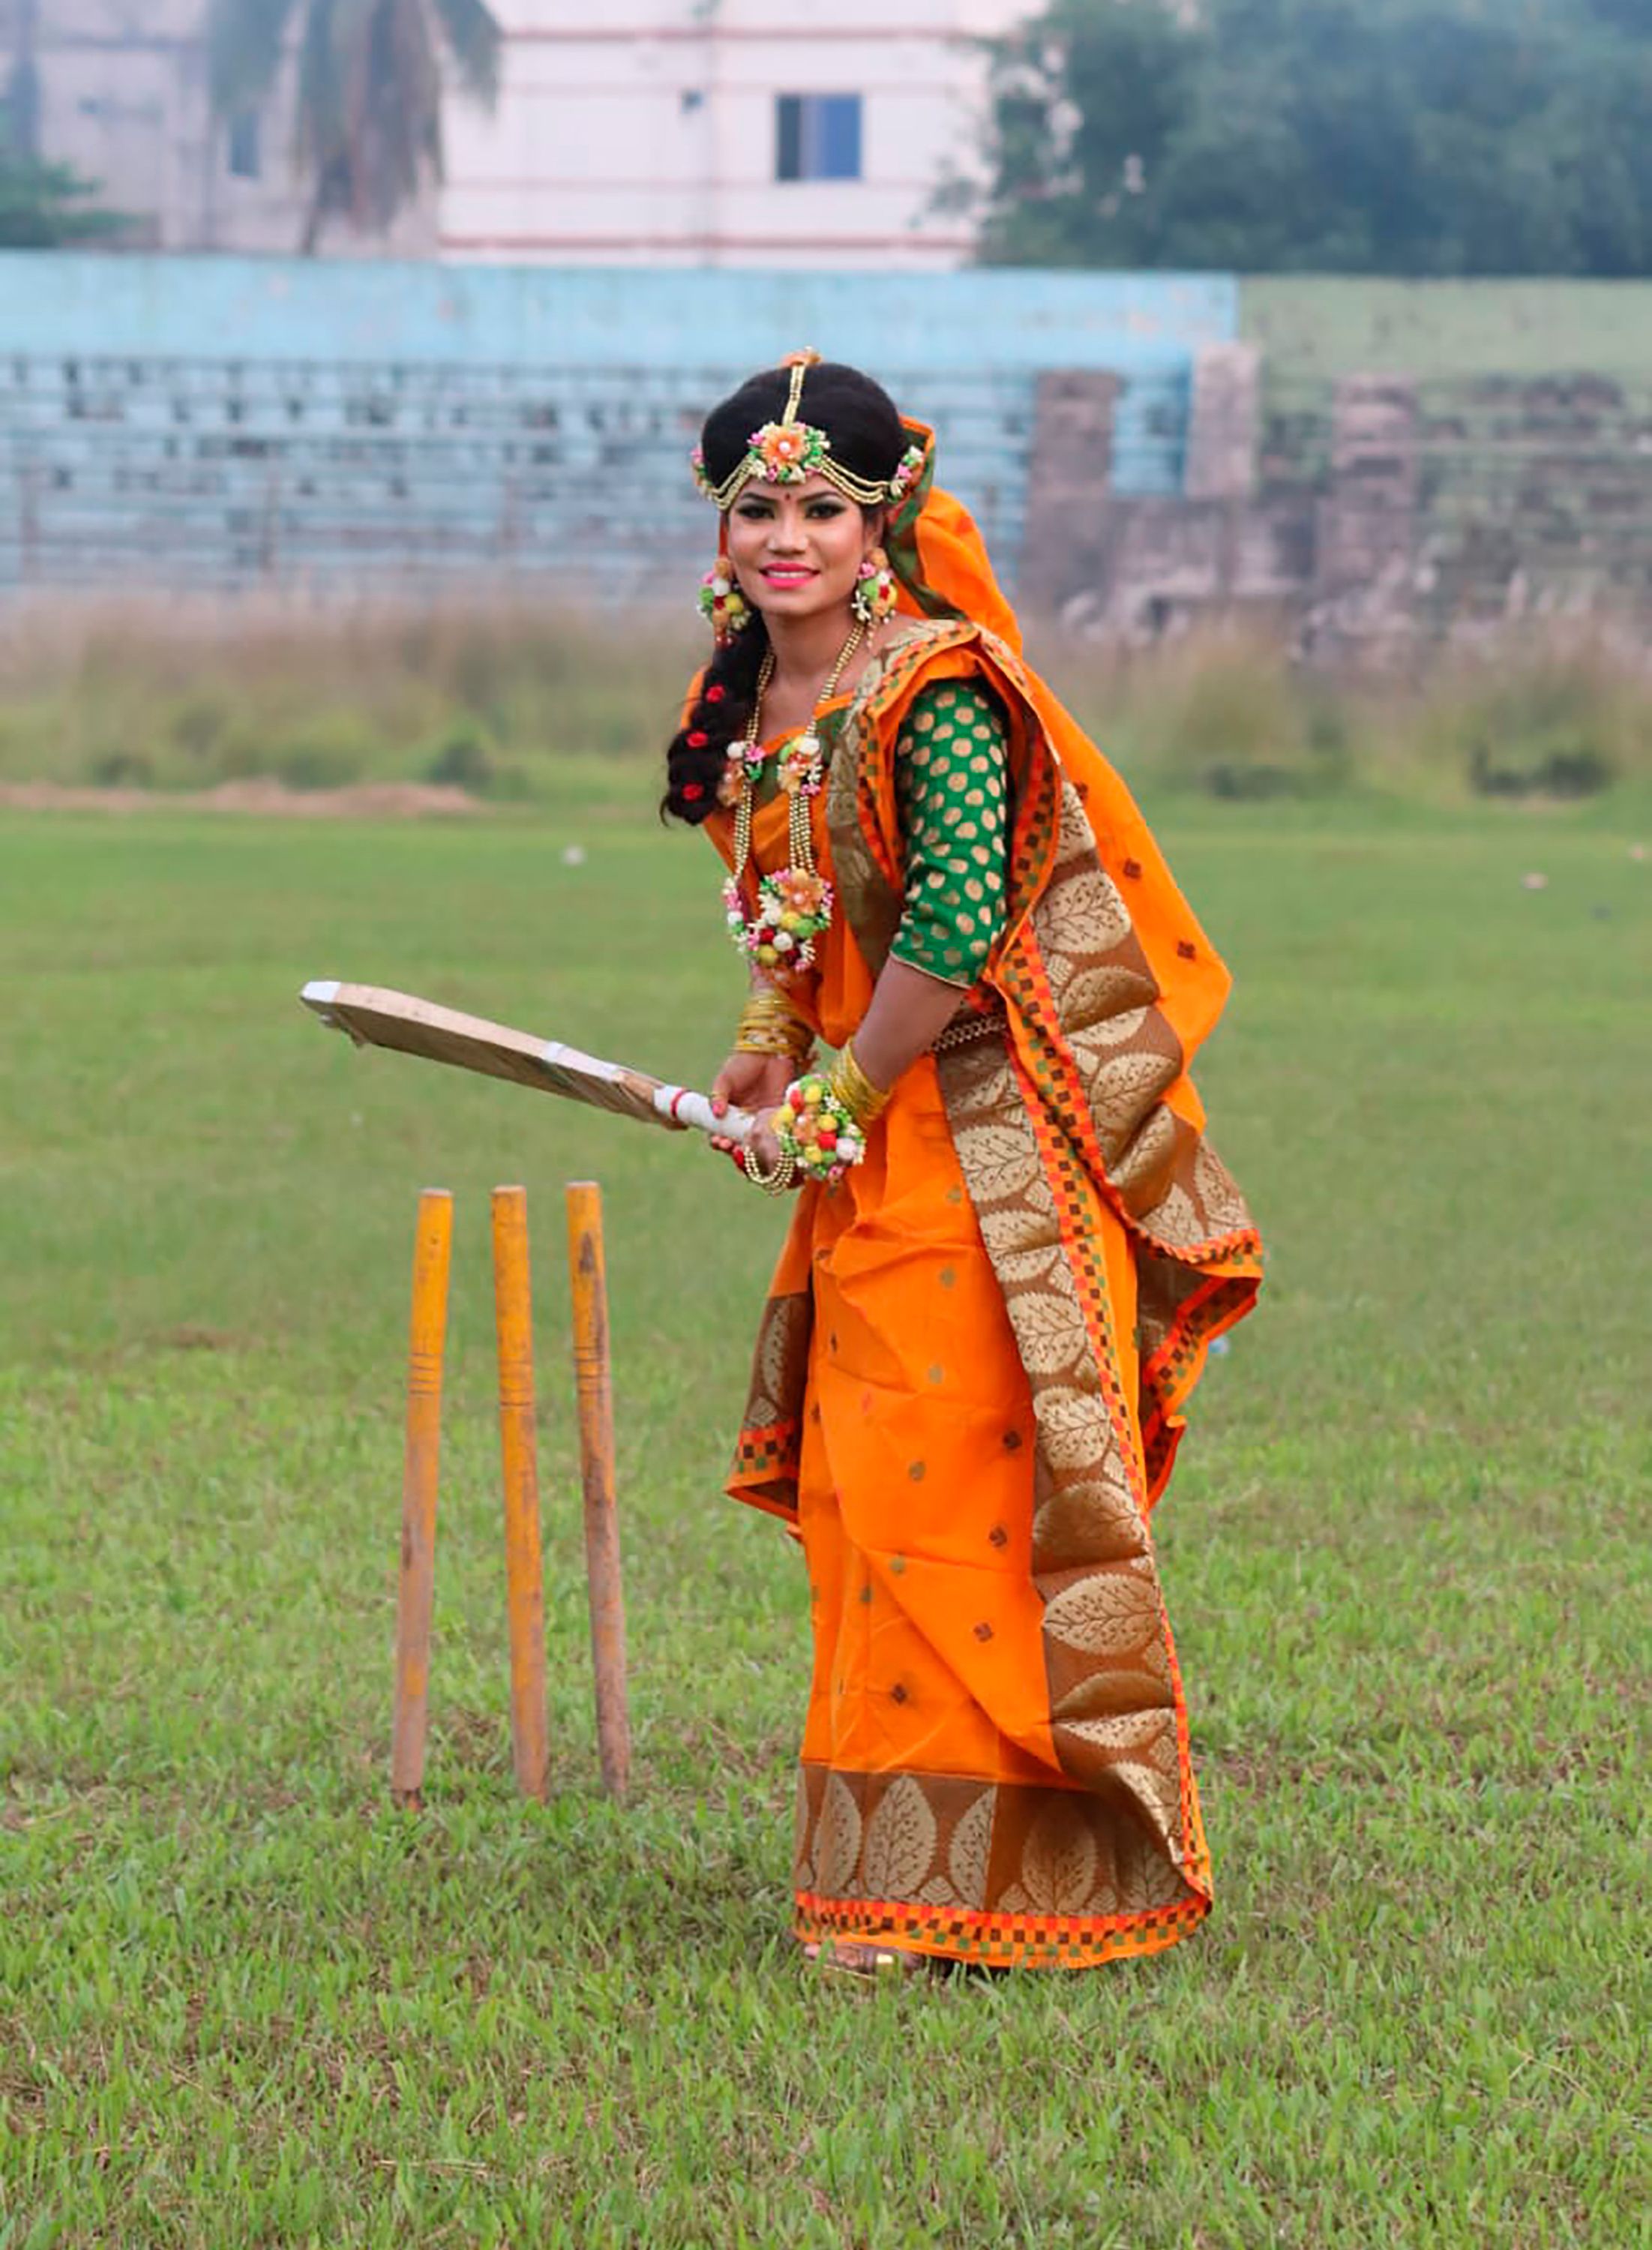 Bride goes into bat in Bangladesh; cricket match a big hit The Seattle Times